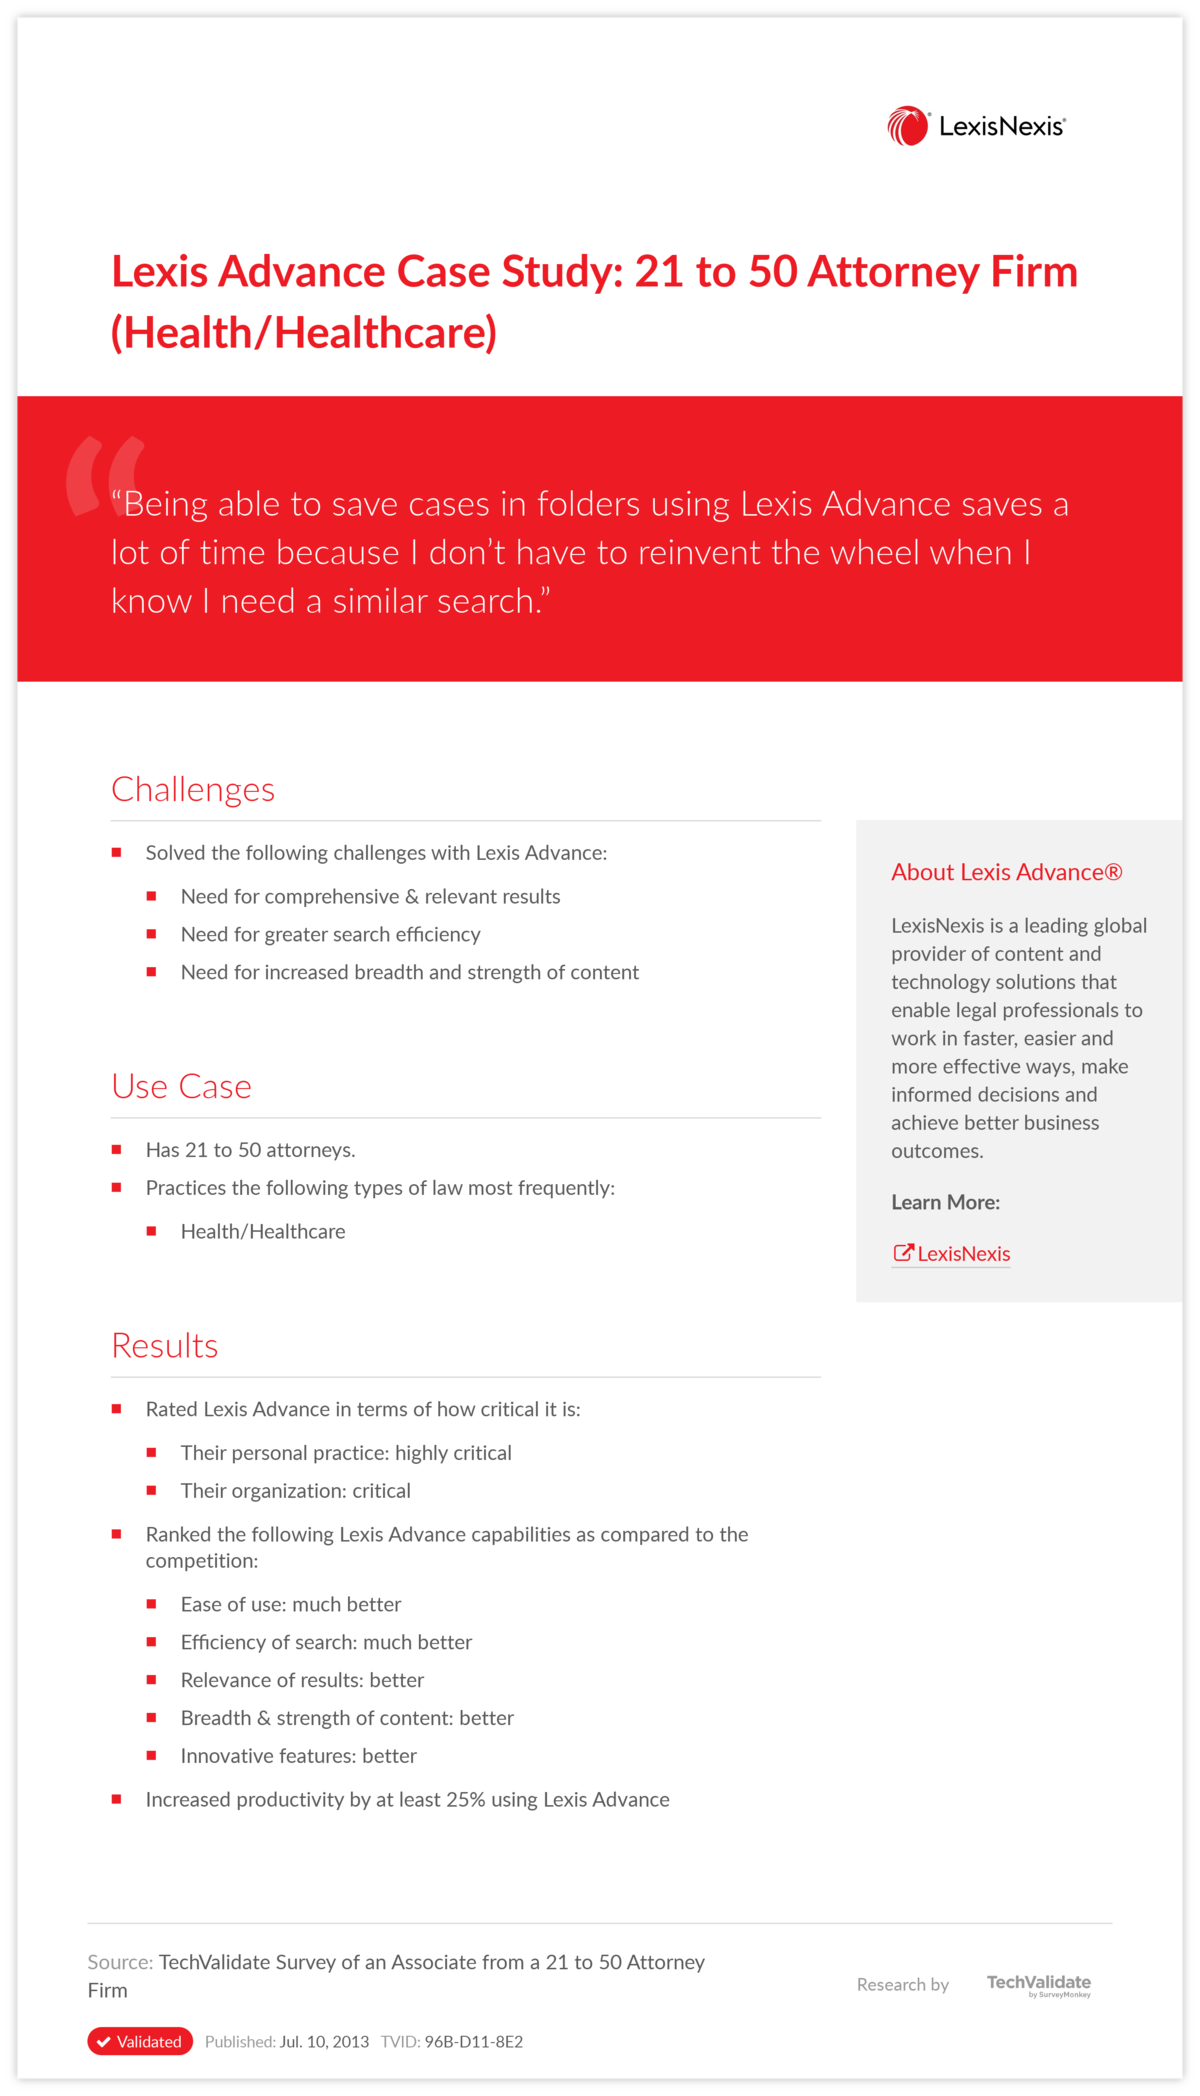 Lexis Advance Case Study: 21 to 50 Attorney Firm (Health/Healthcare)